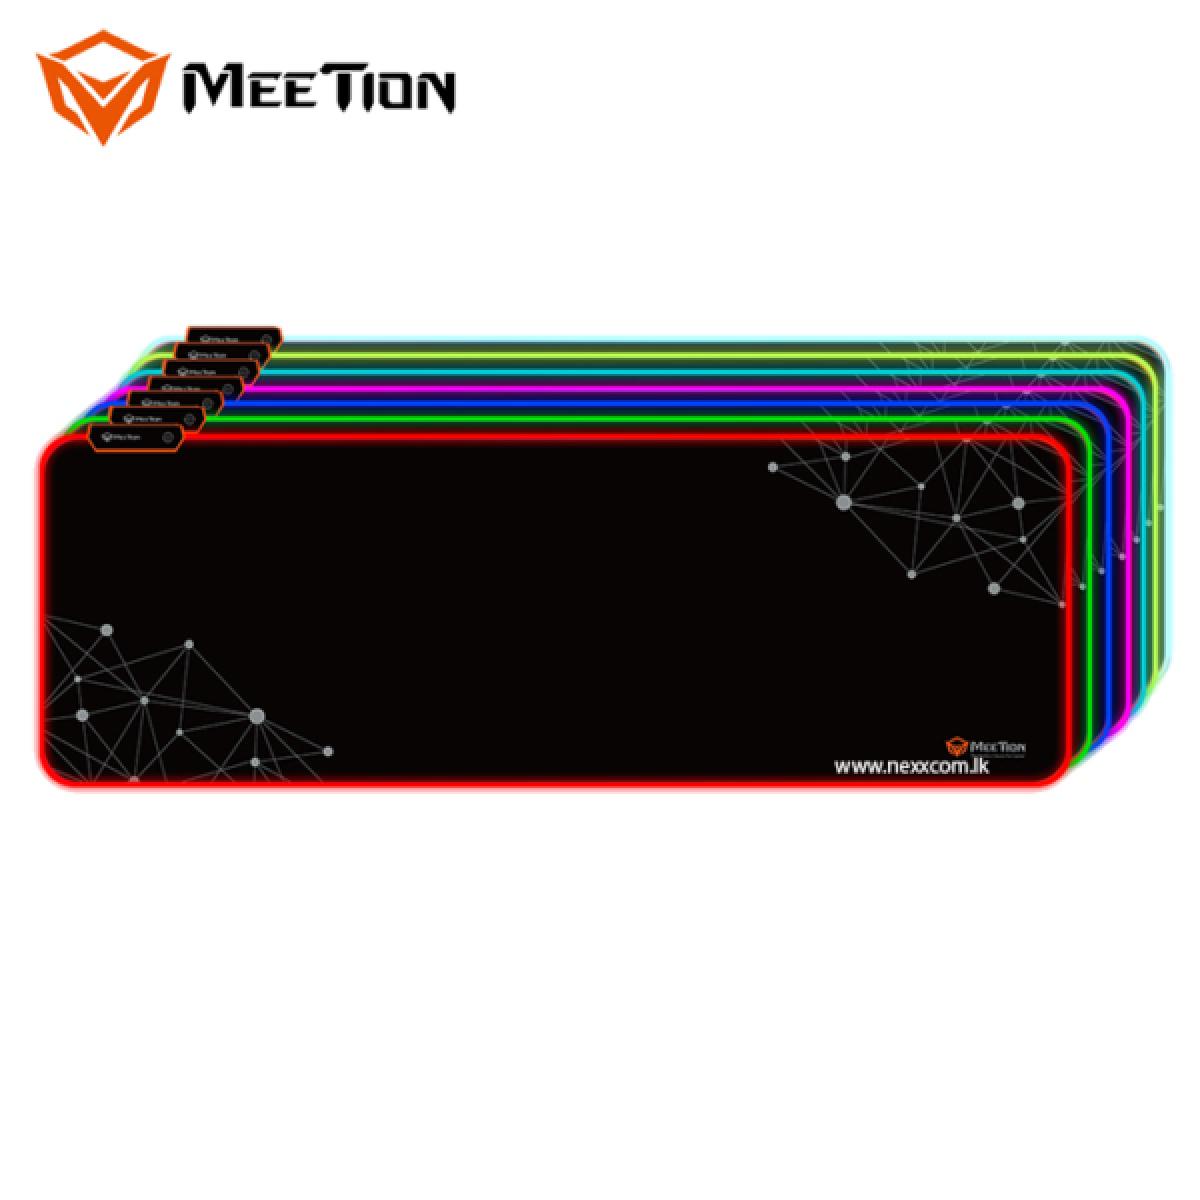 MeeTion Large RGB Keyboard and Mouse Pad for Gaming